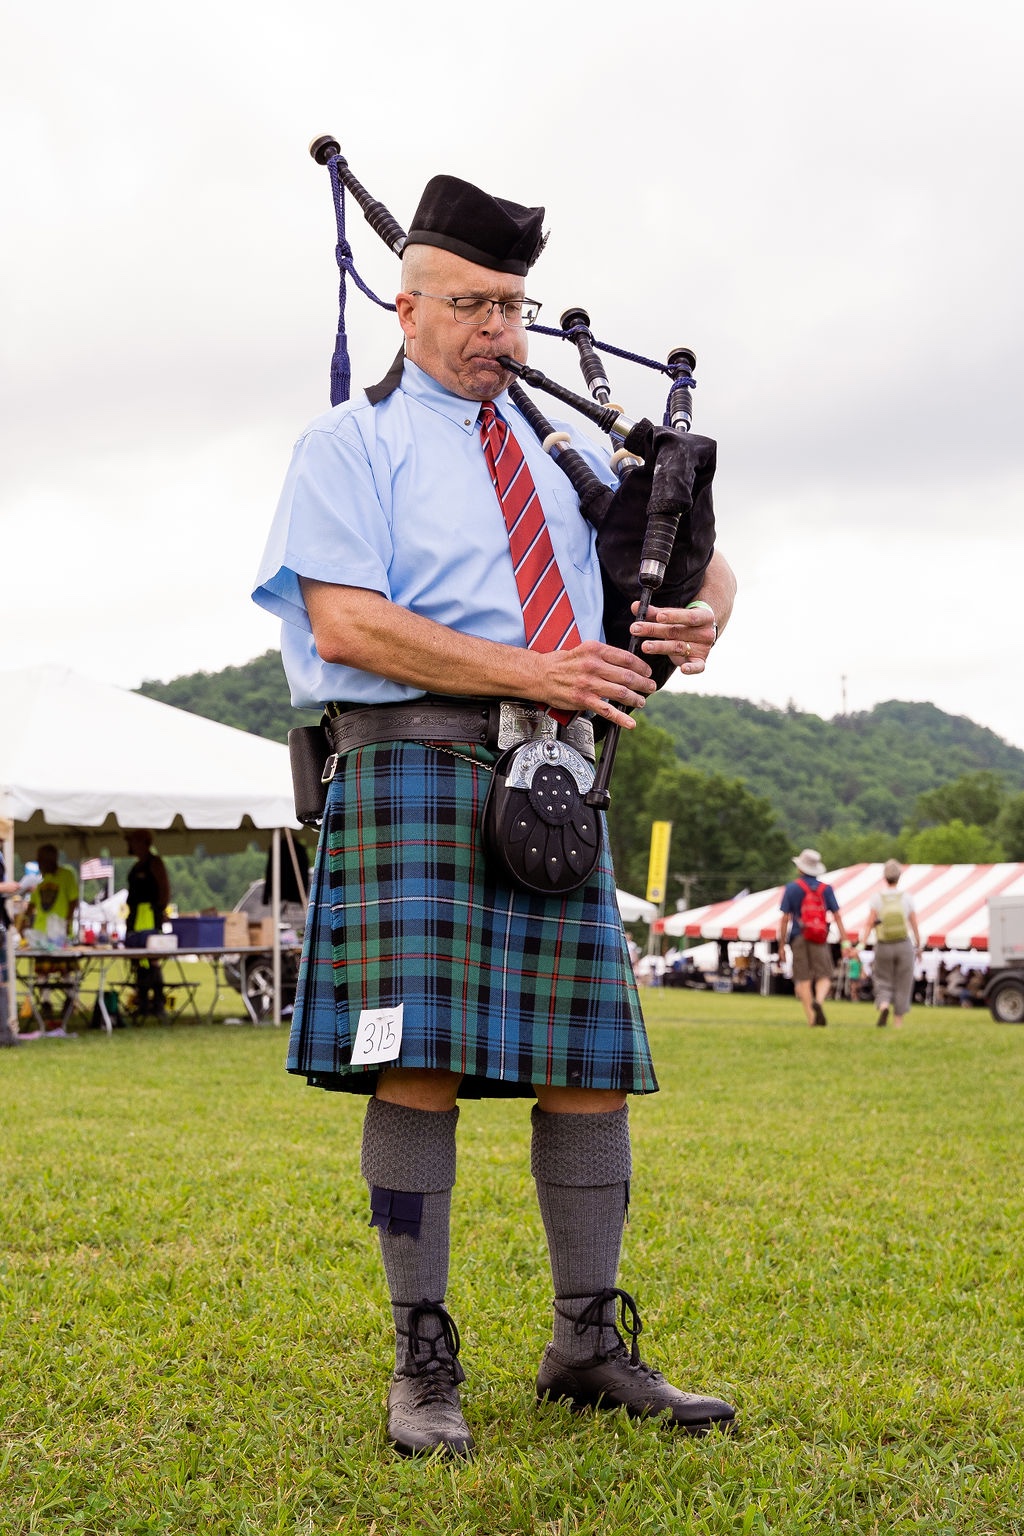 bagpiper playing in Scottish festival competition